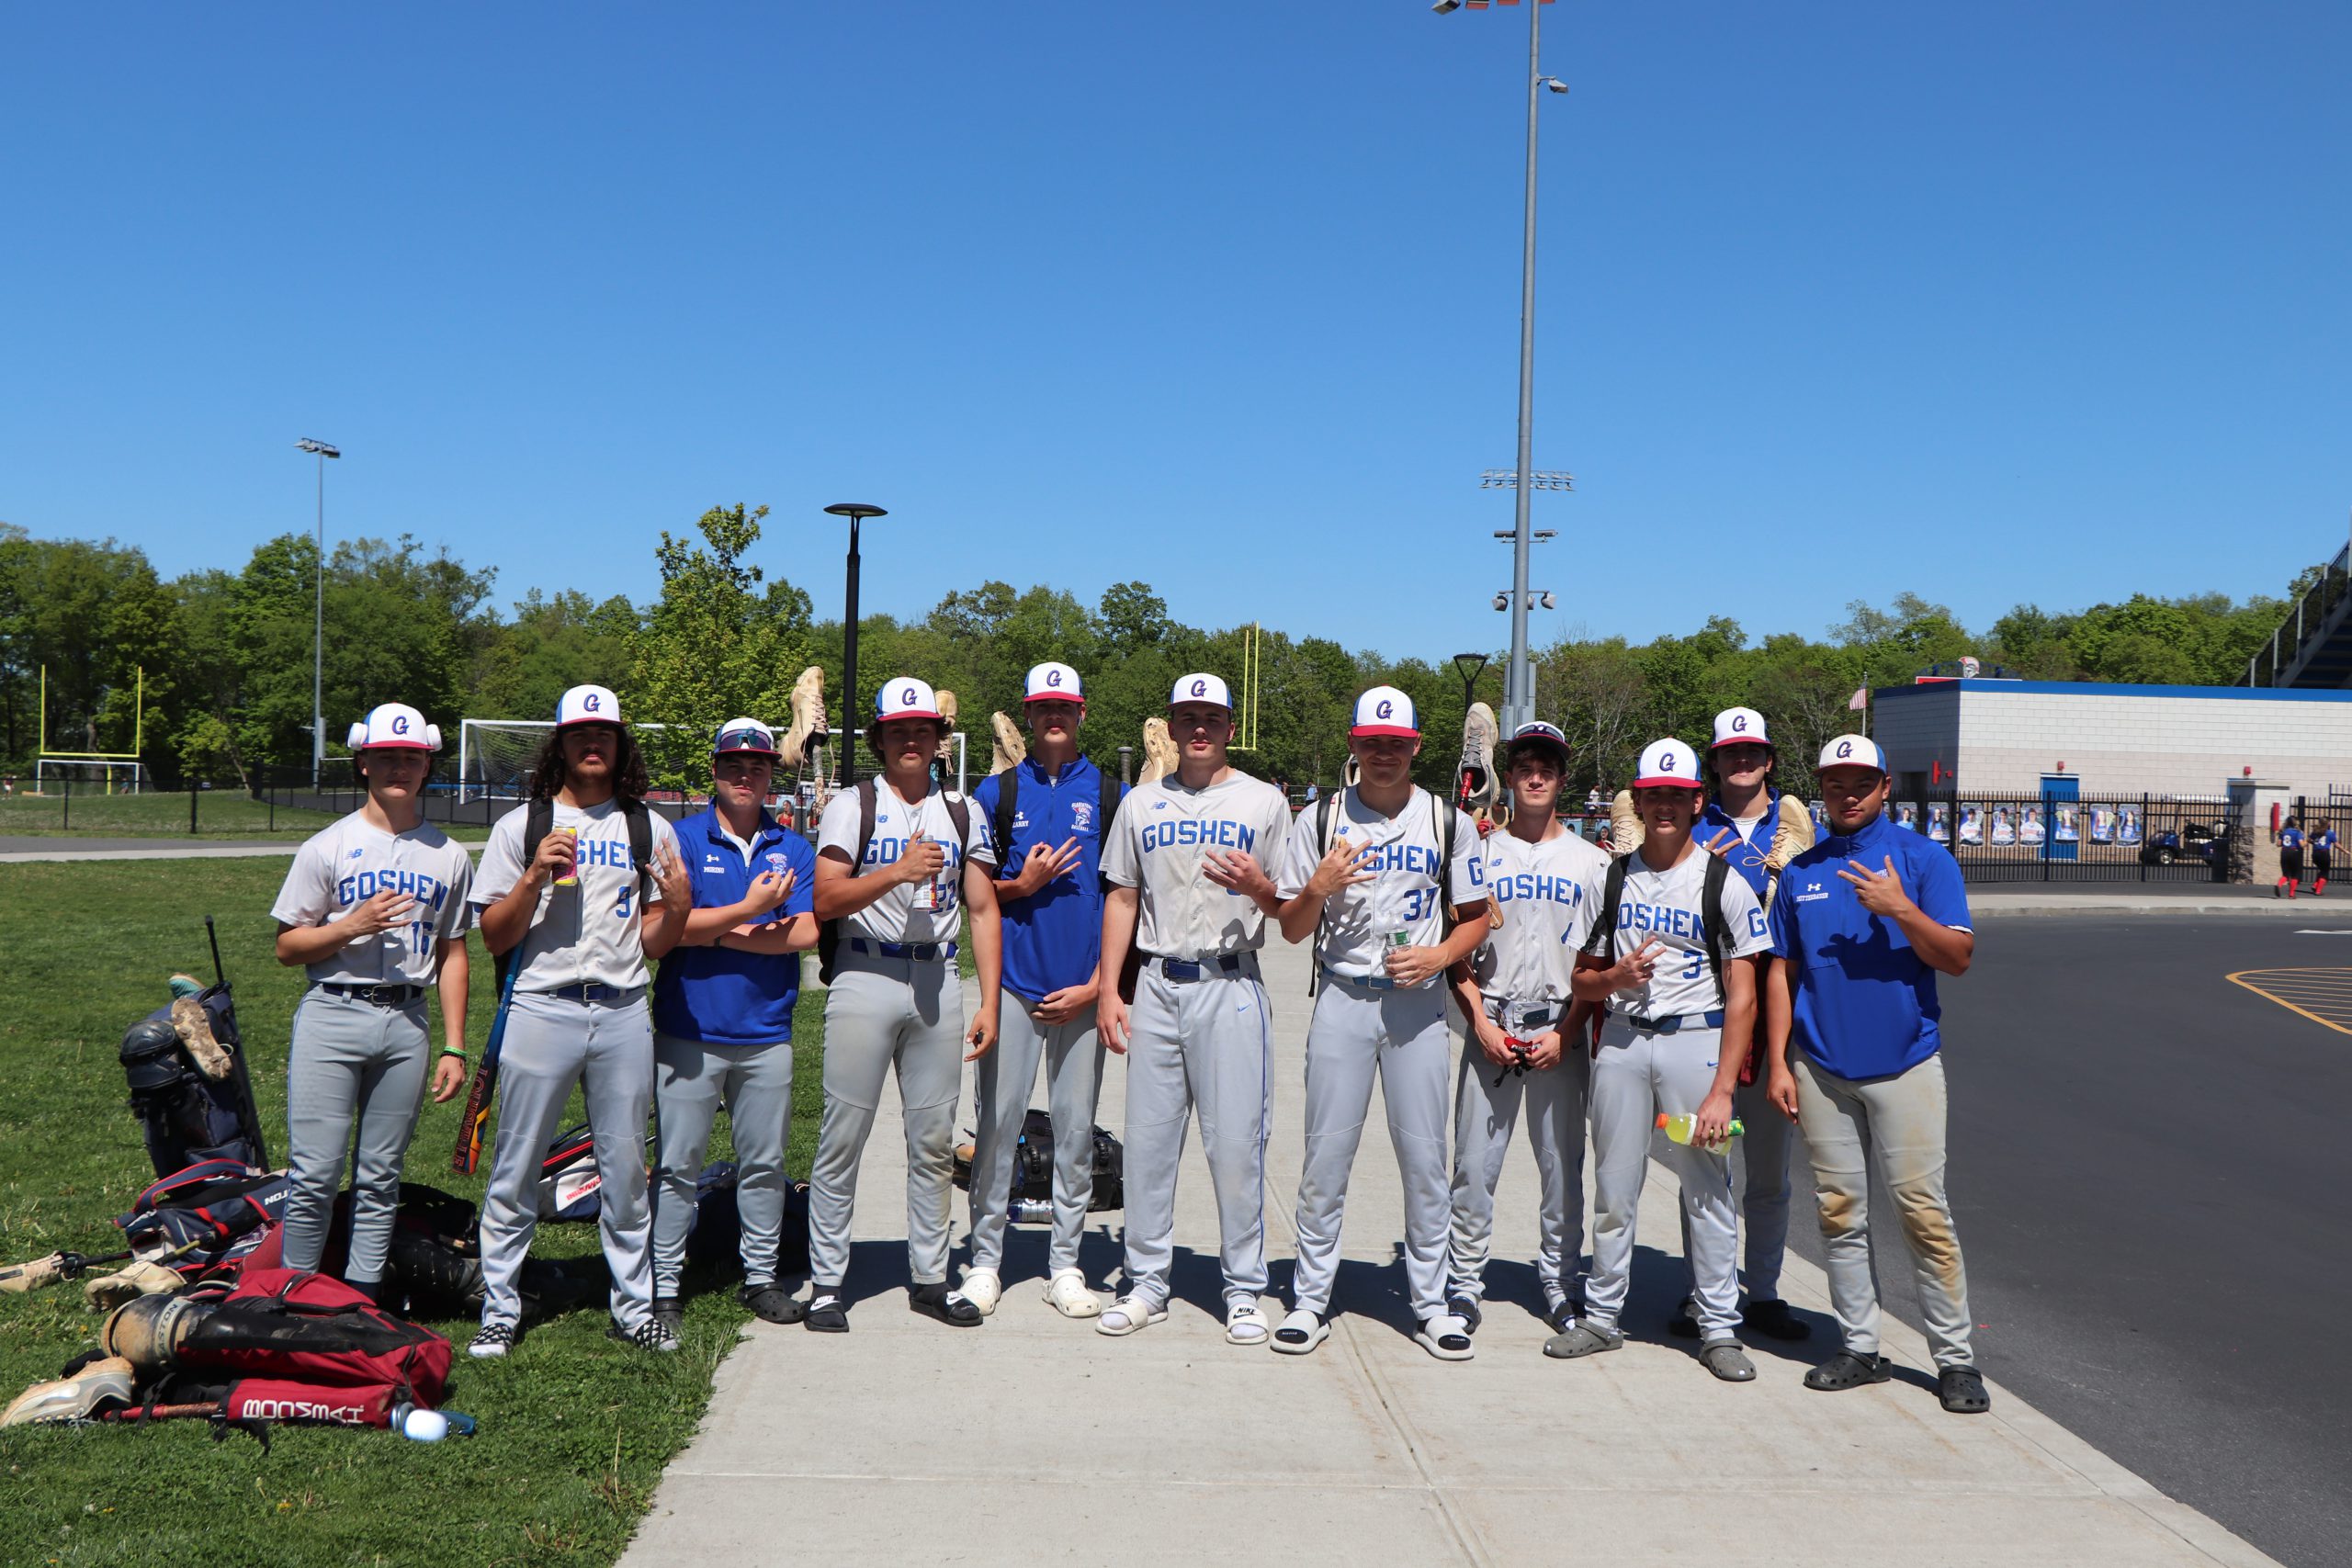 GHS Baseball team throws up hand signals standing together in uniform with gear to their left outside the high school.
